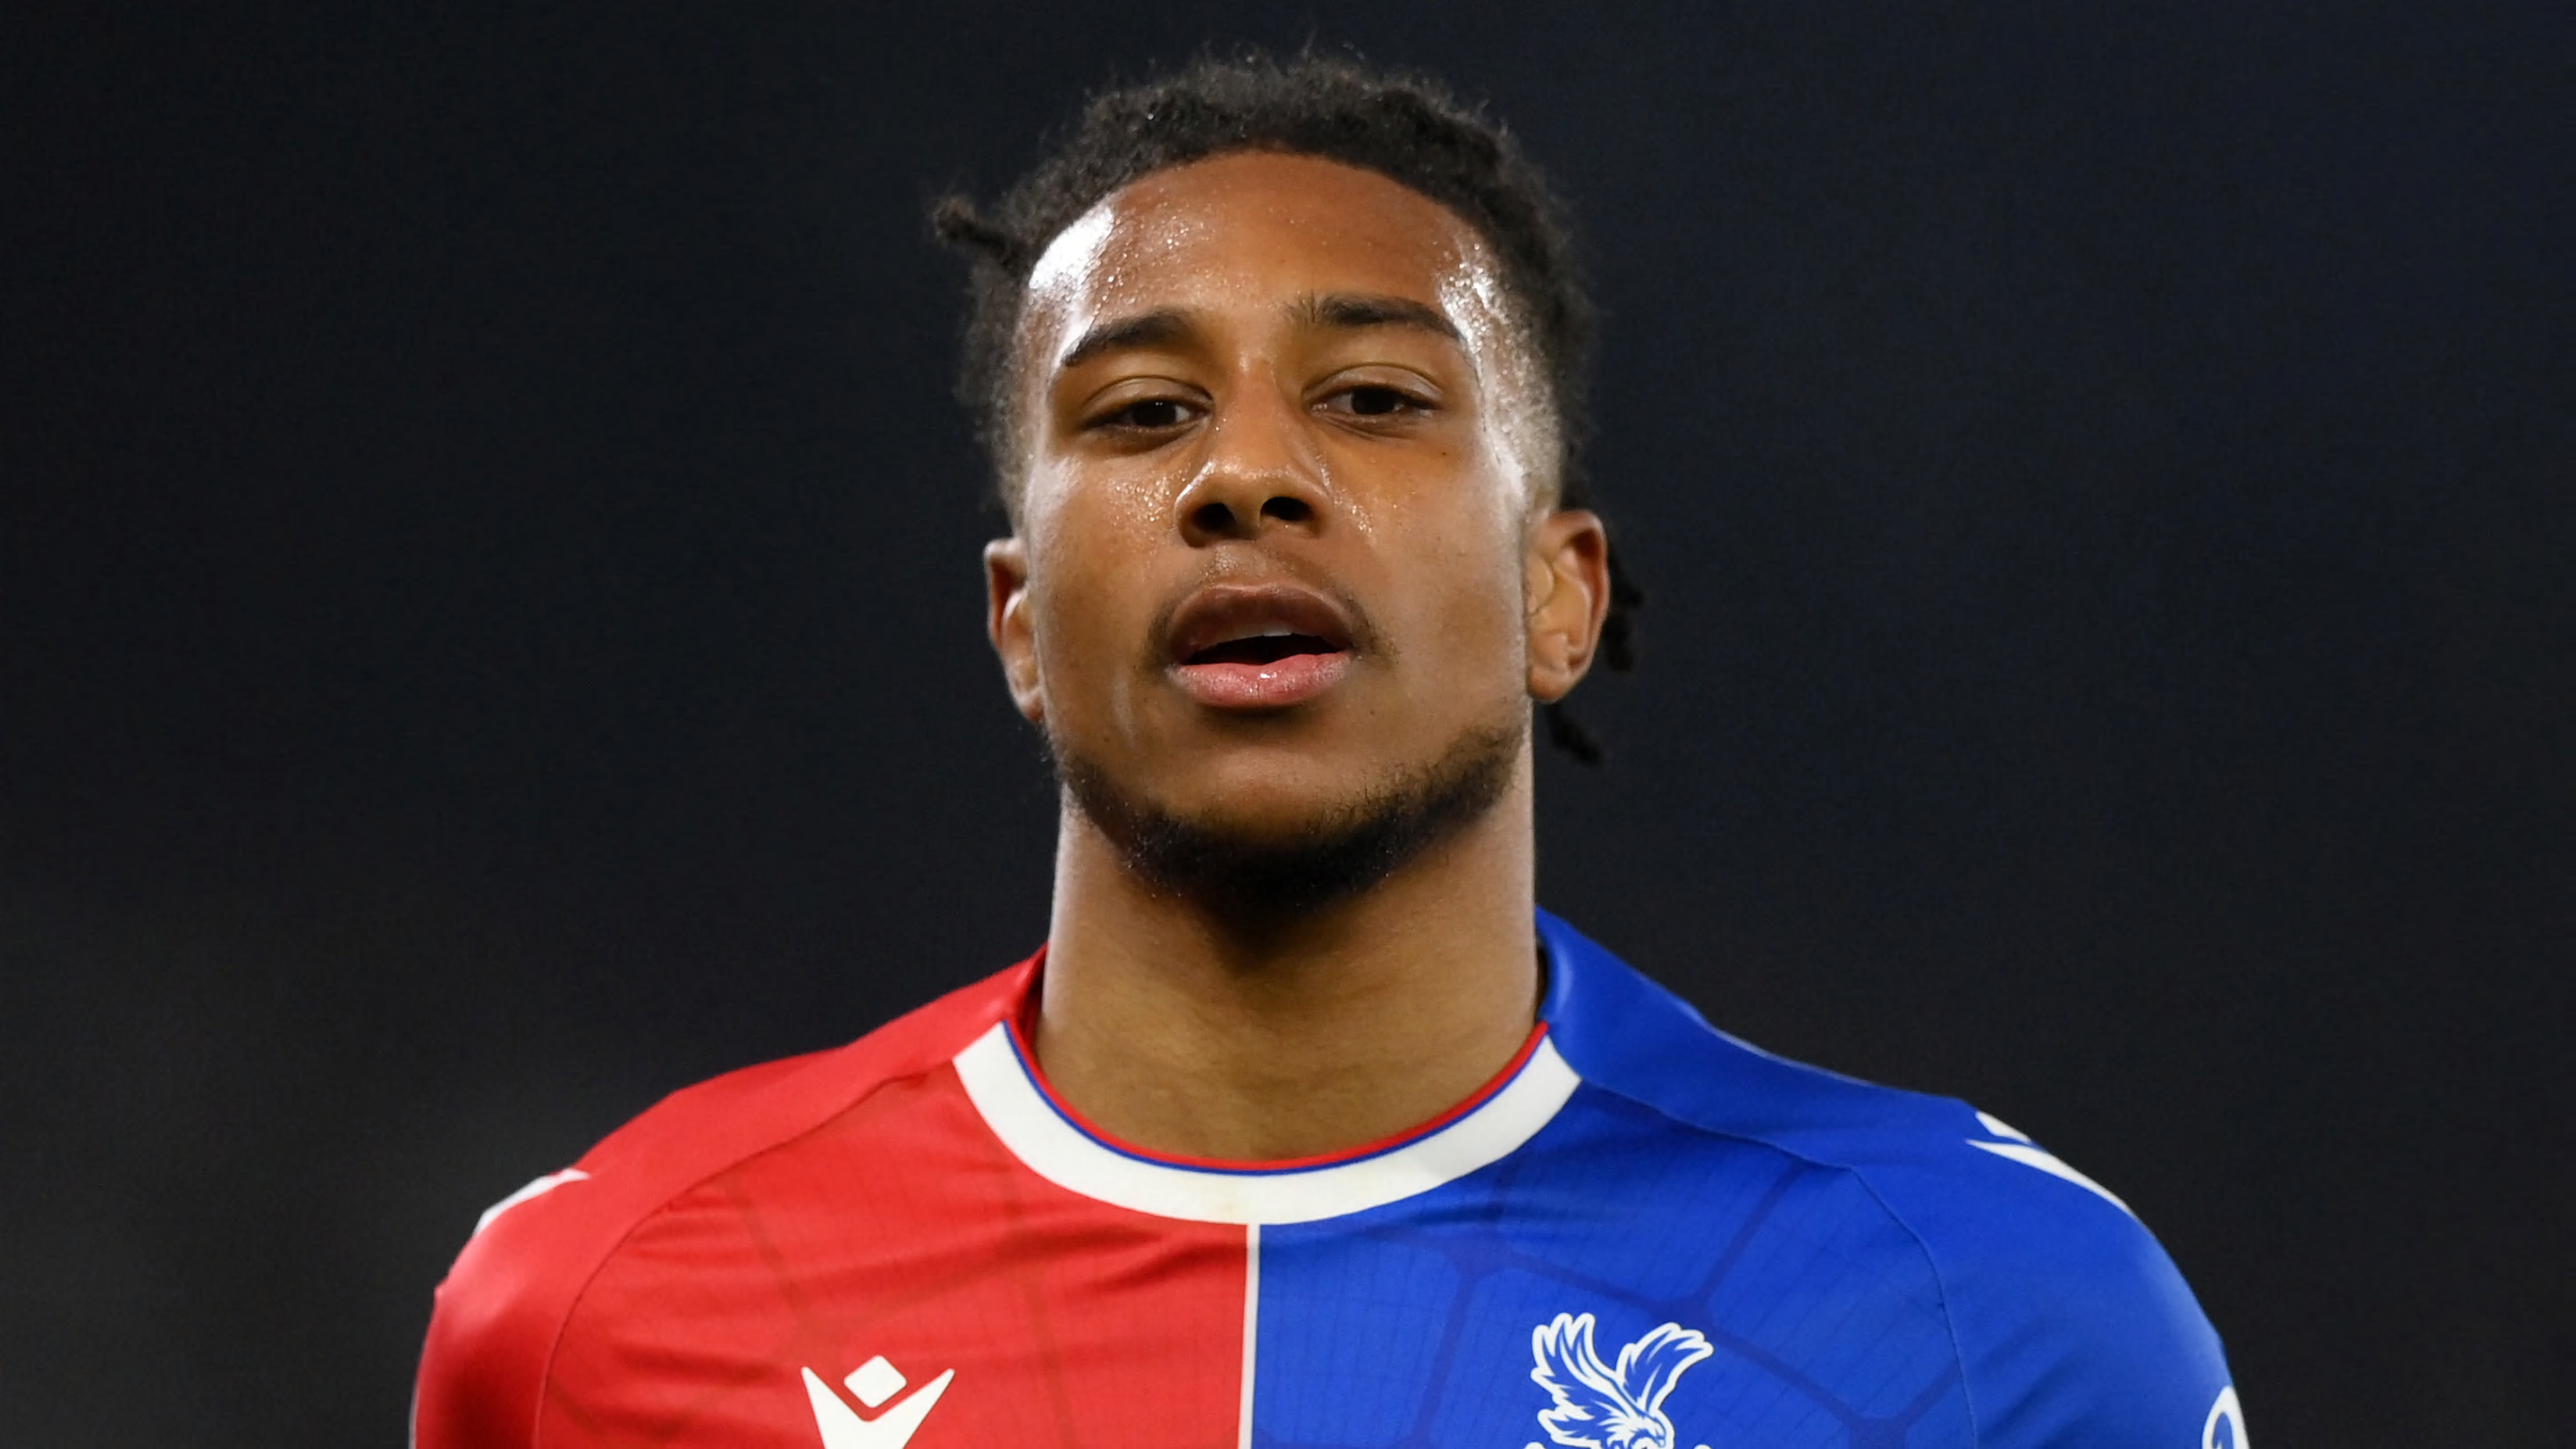 Bayern Munich agree fee with Crystal Palace for Michael Olise - report